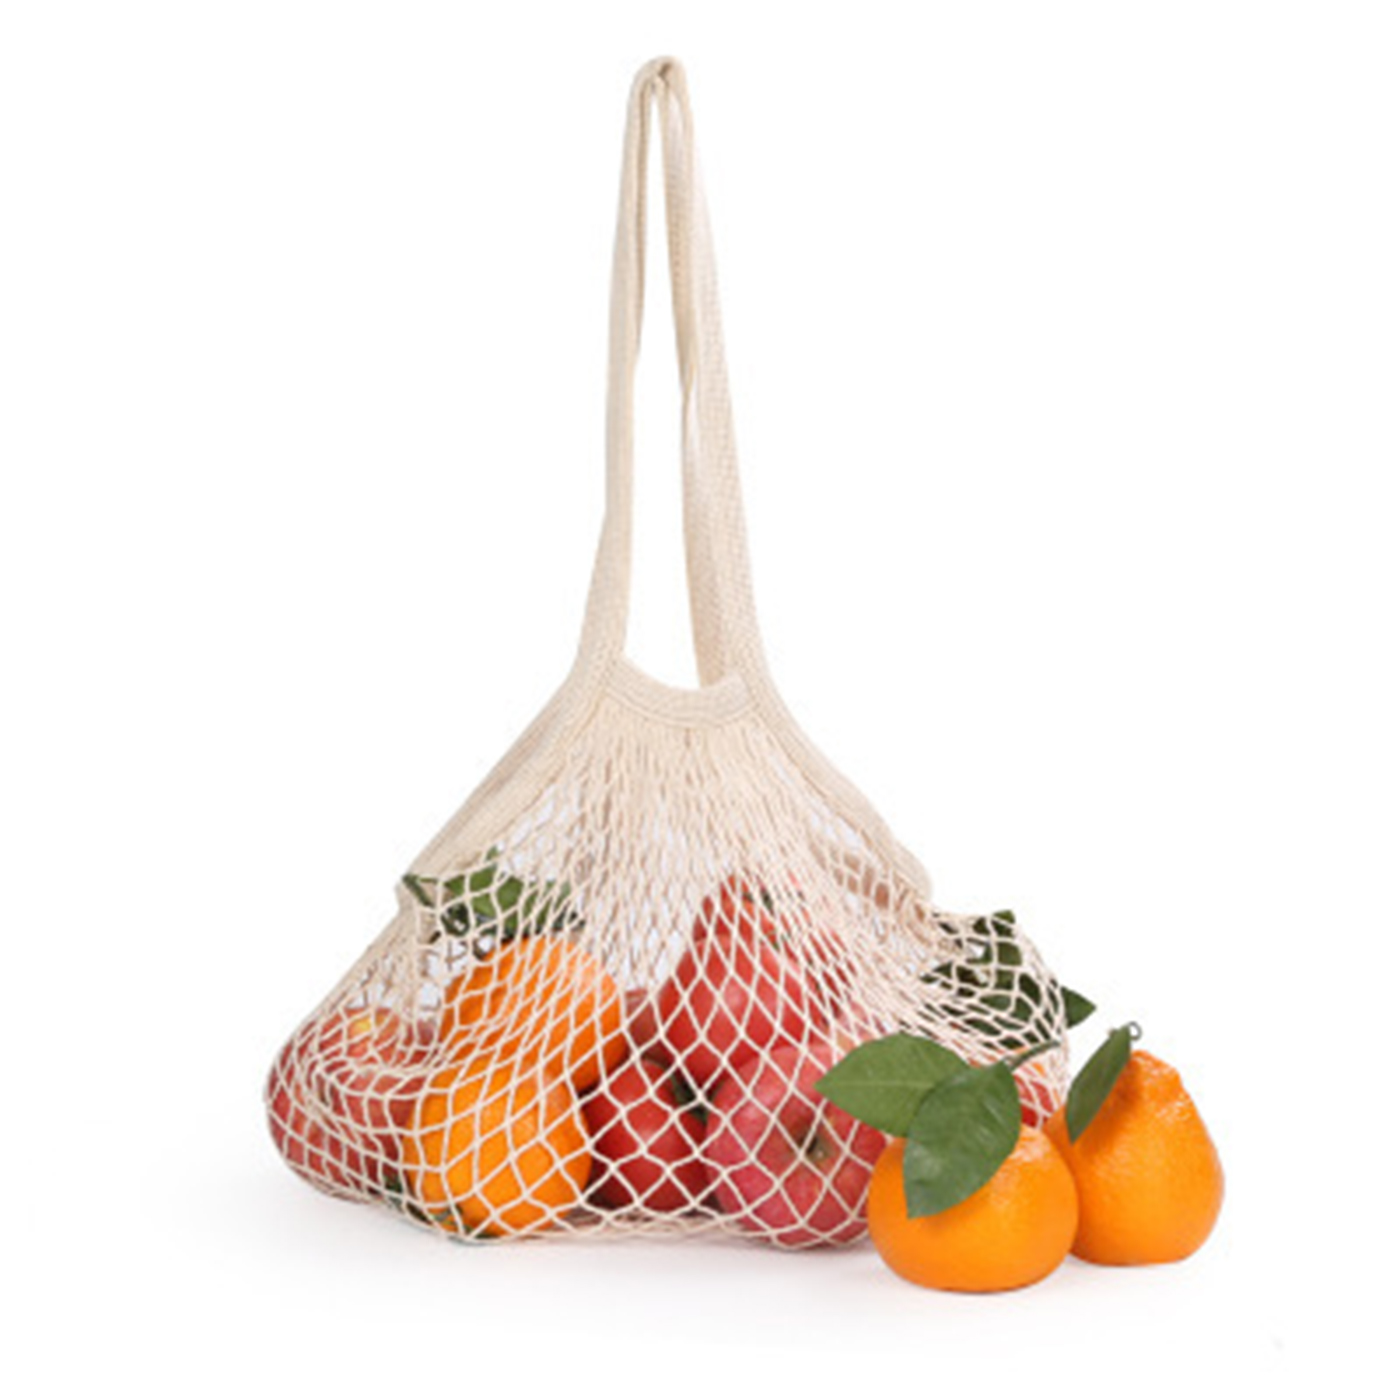 Promotional Cotton Mesh Grocery Bag